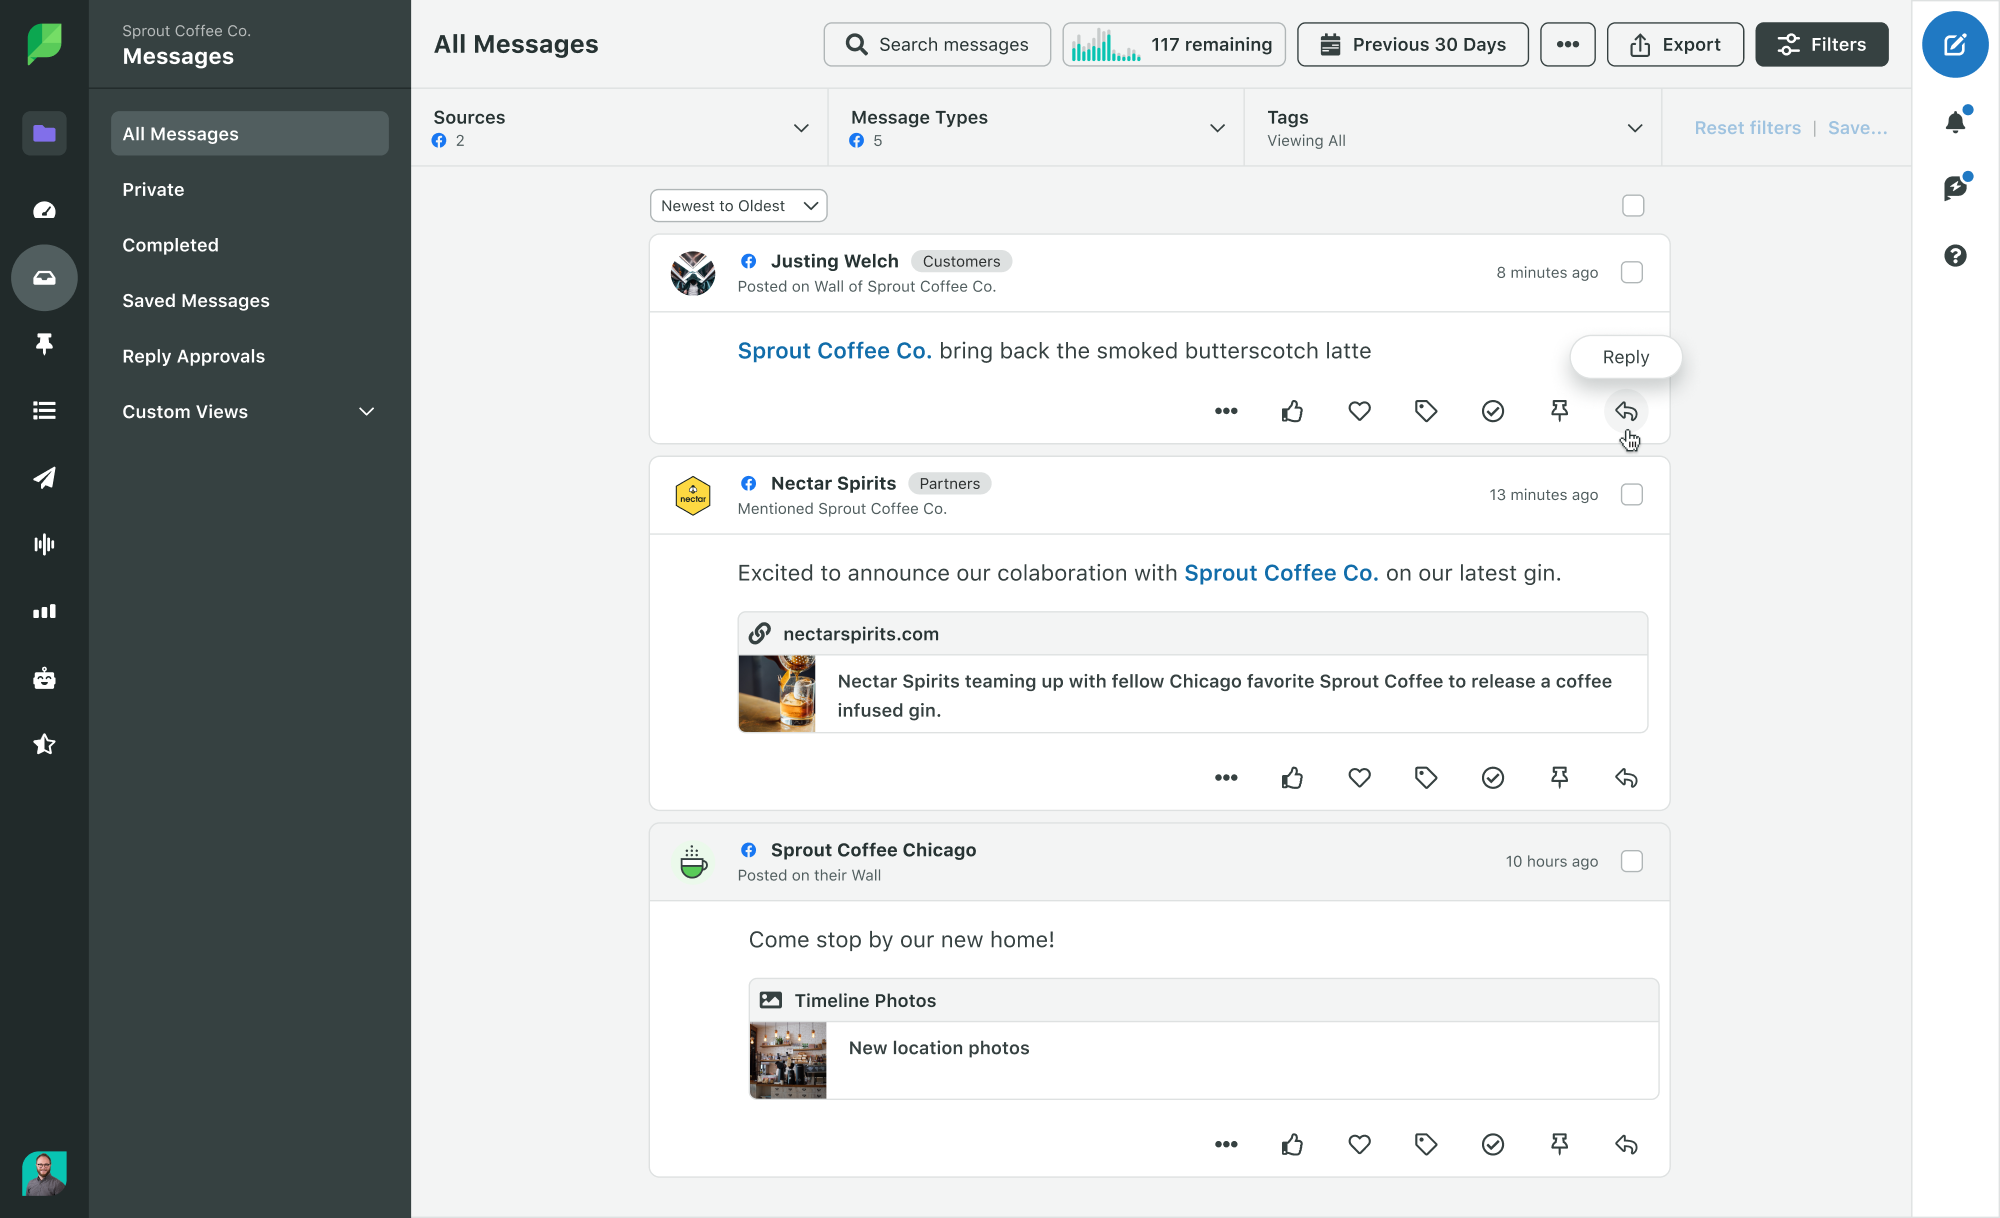 Use Sprout Social's Smart Inbox to reply to followers, brand mentions, and brand community members.